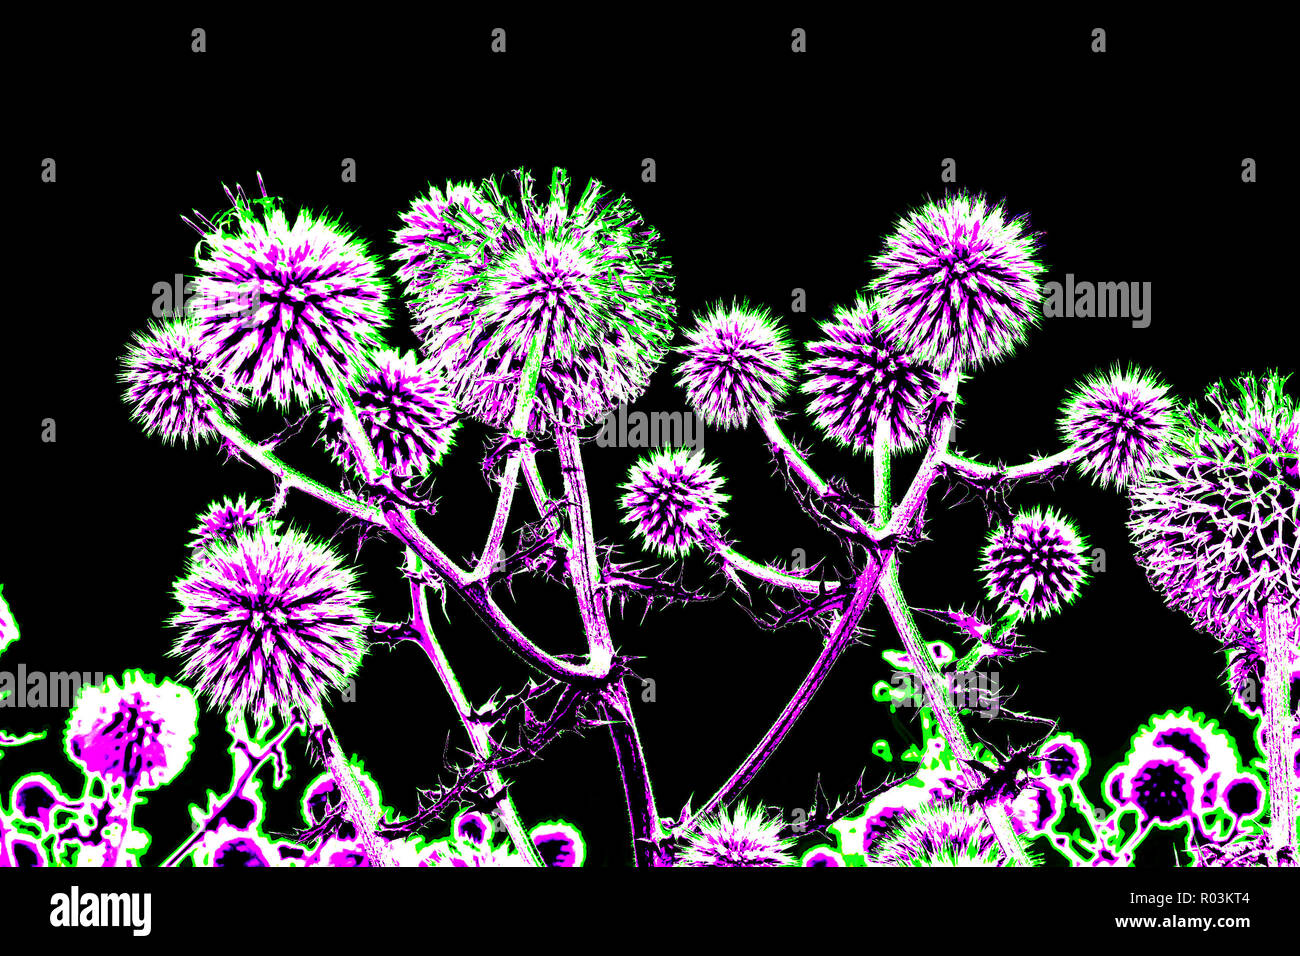 Spherical thistle flowers (Echinops ritro) on the black background. Toned herbal texture in bright colors Stock Photo